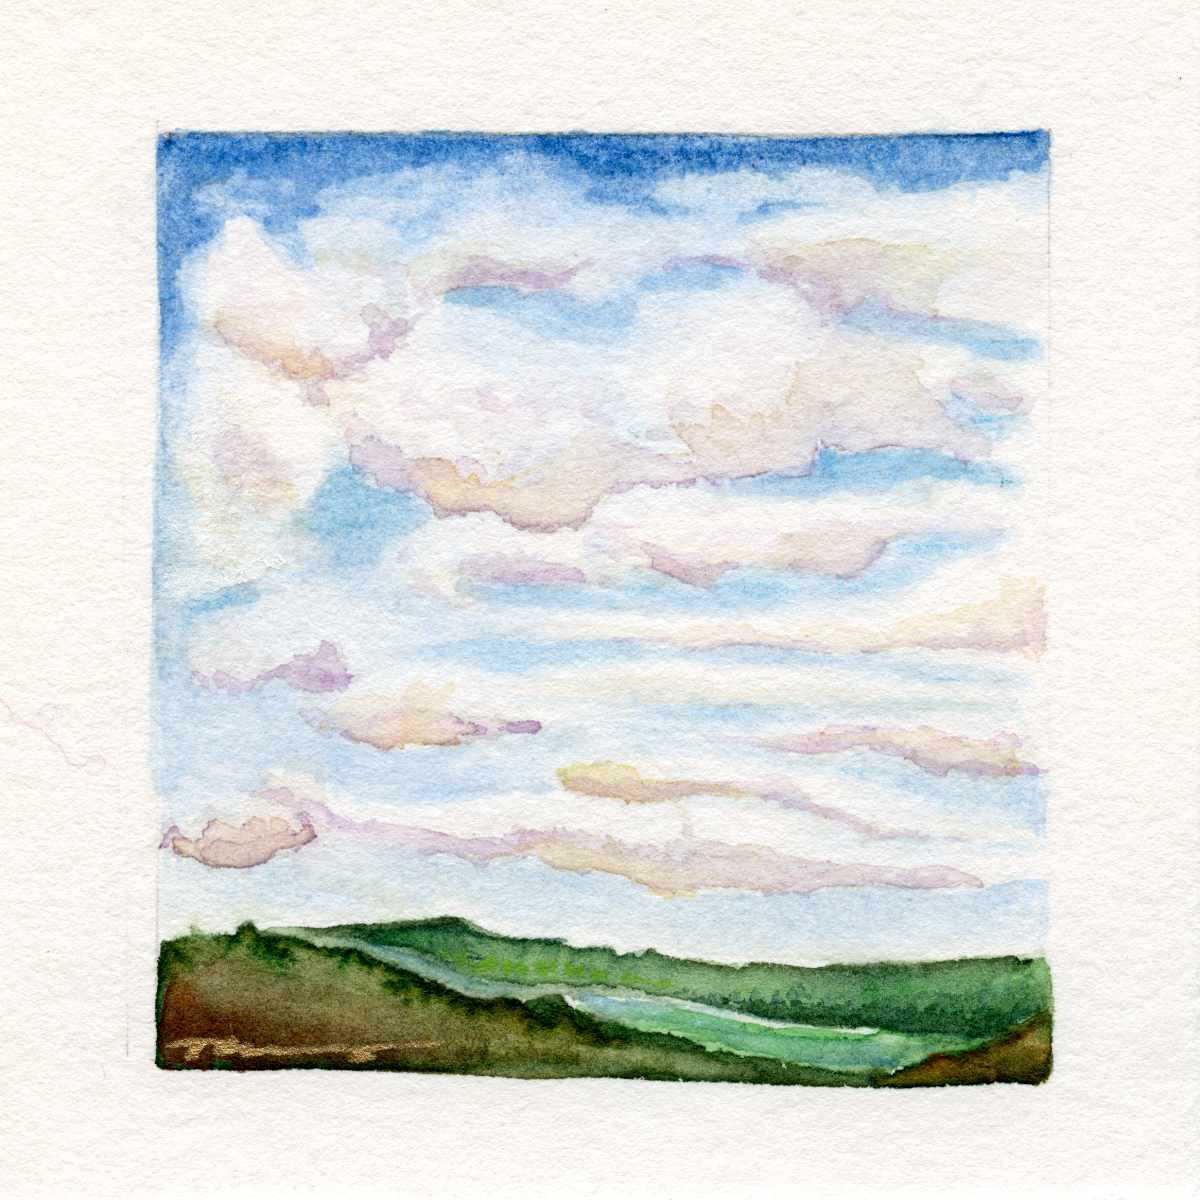 Big Clouds 2. 4x4 Mini Watercolor Emotional Landscape. Created with intention to relax your nervous system.